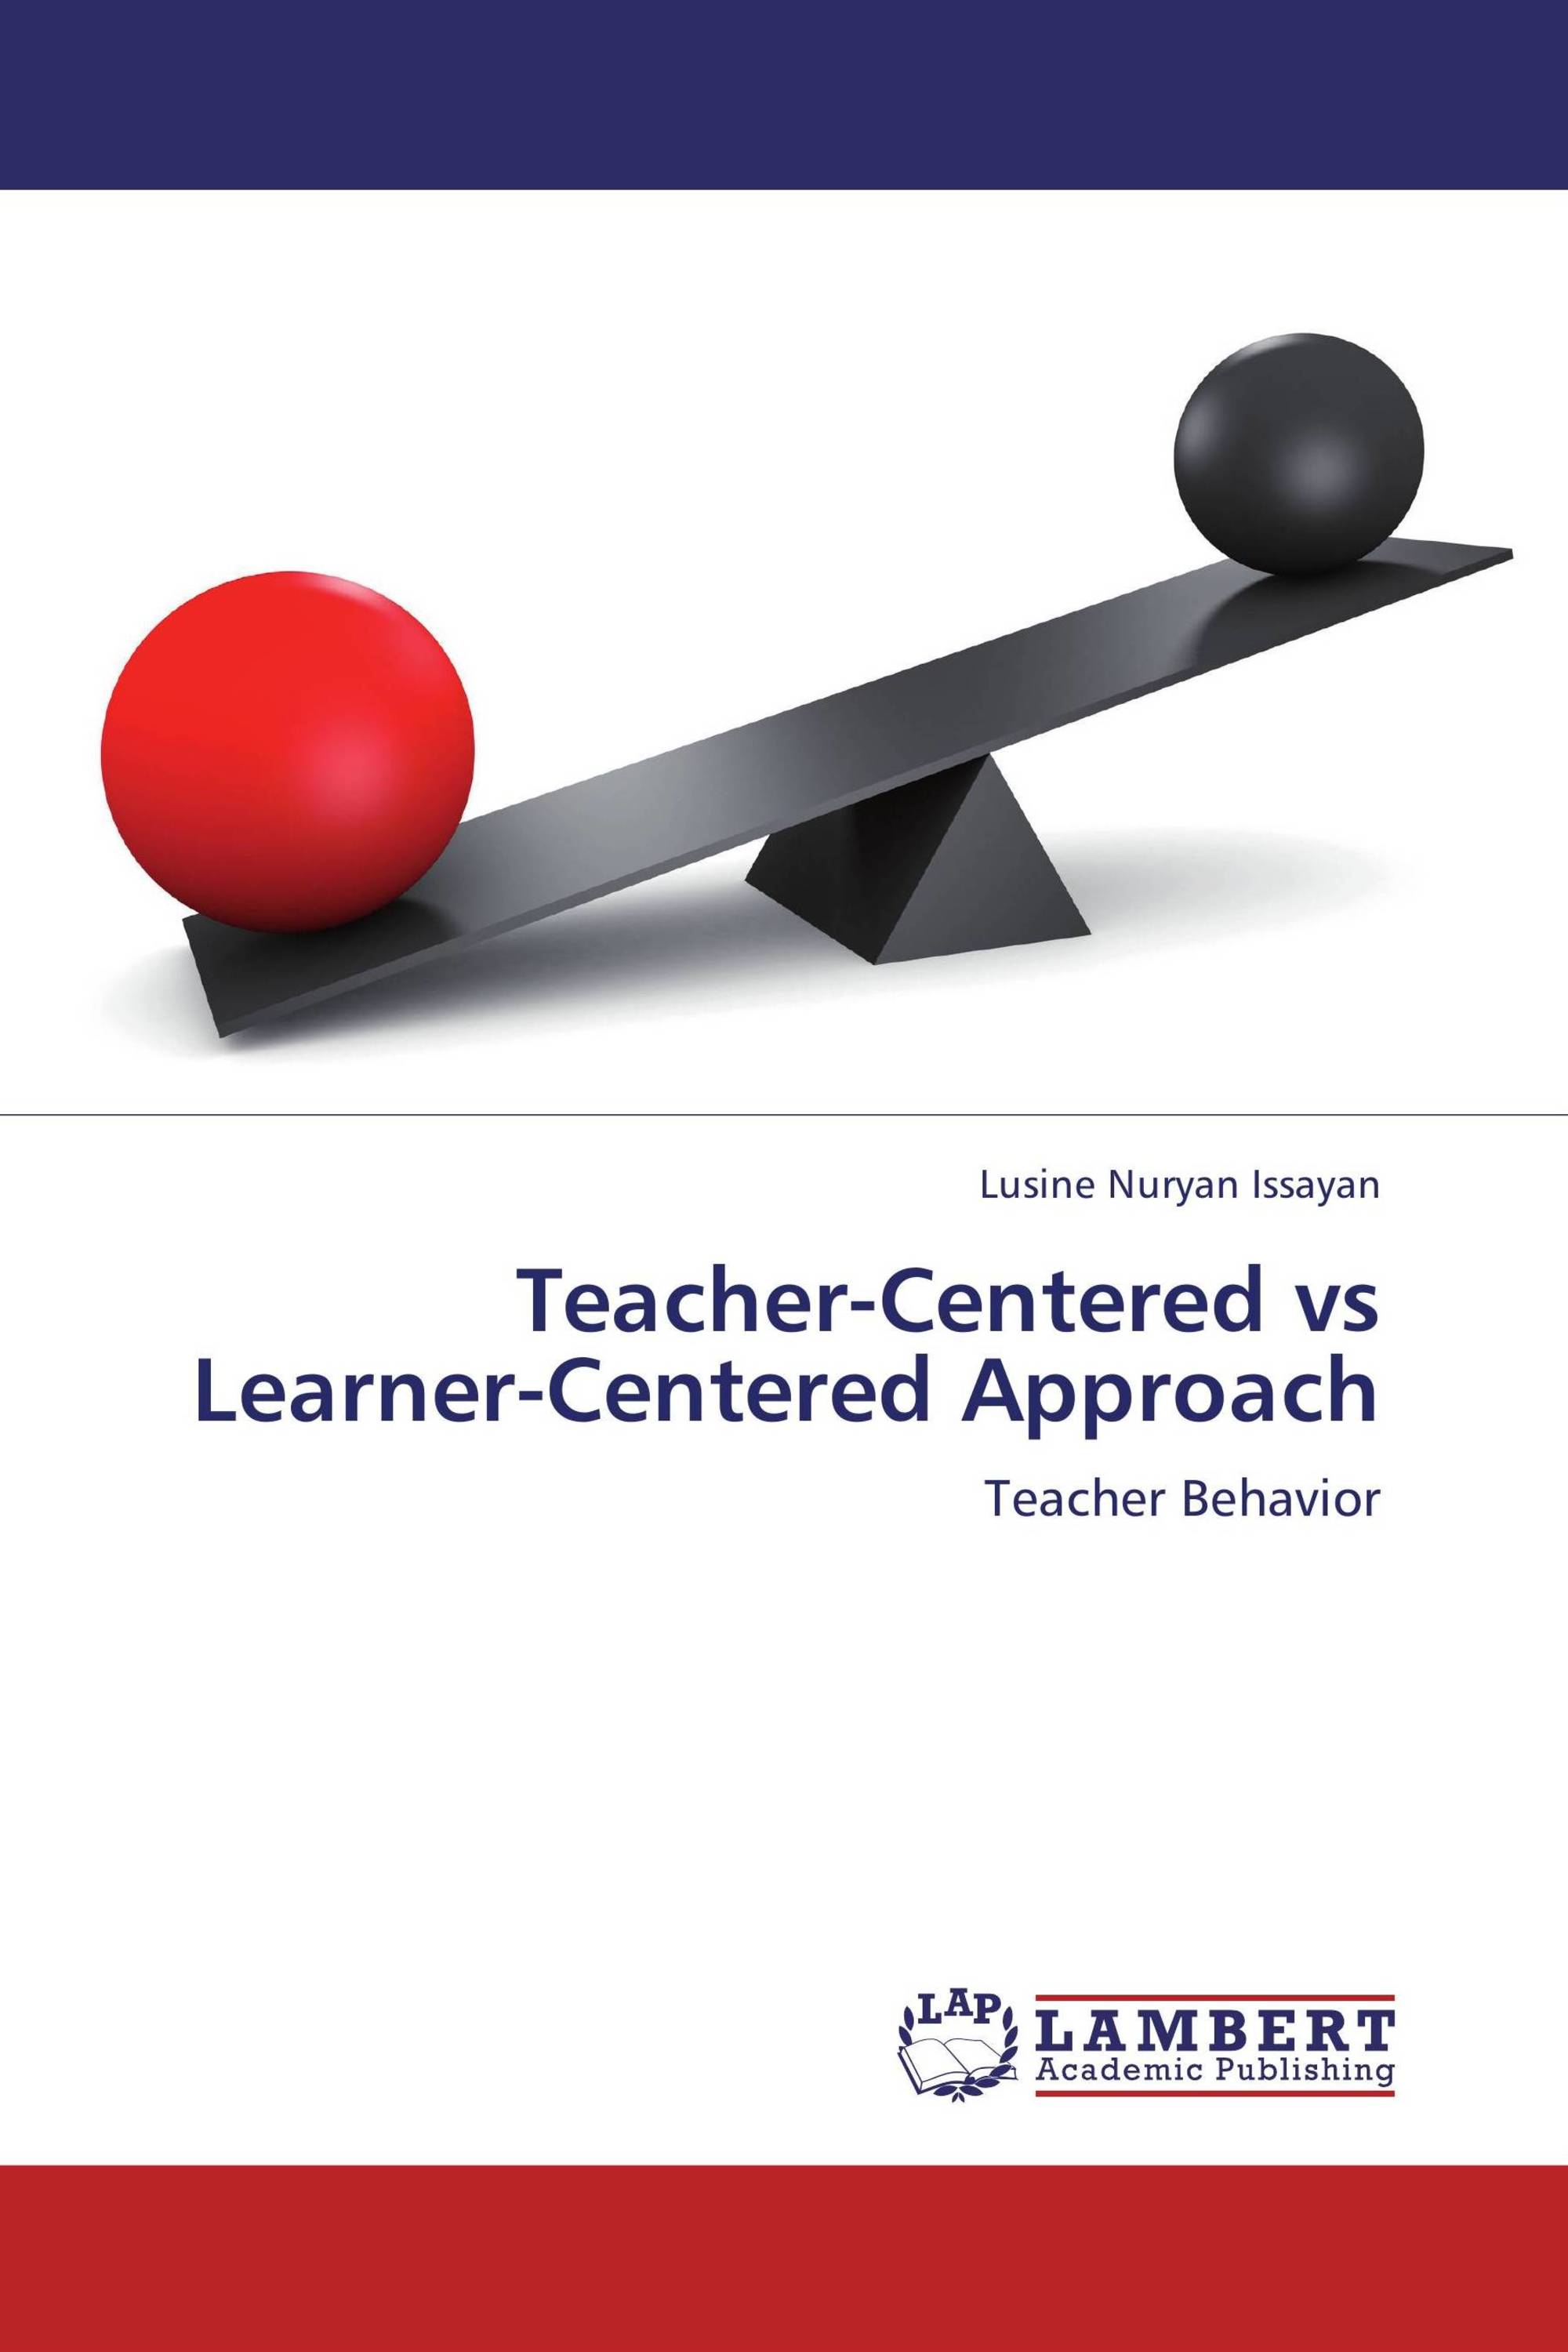 point of view essay about learner centered teaching